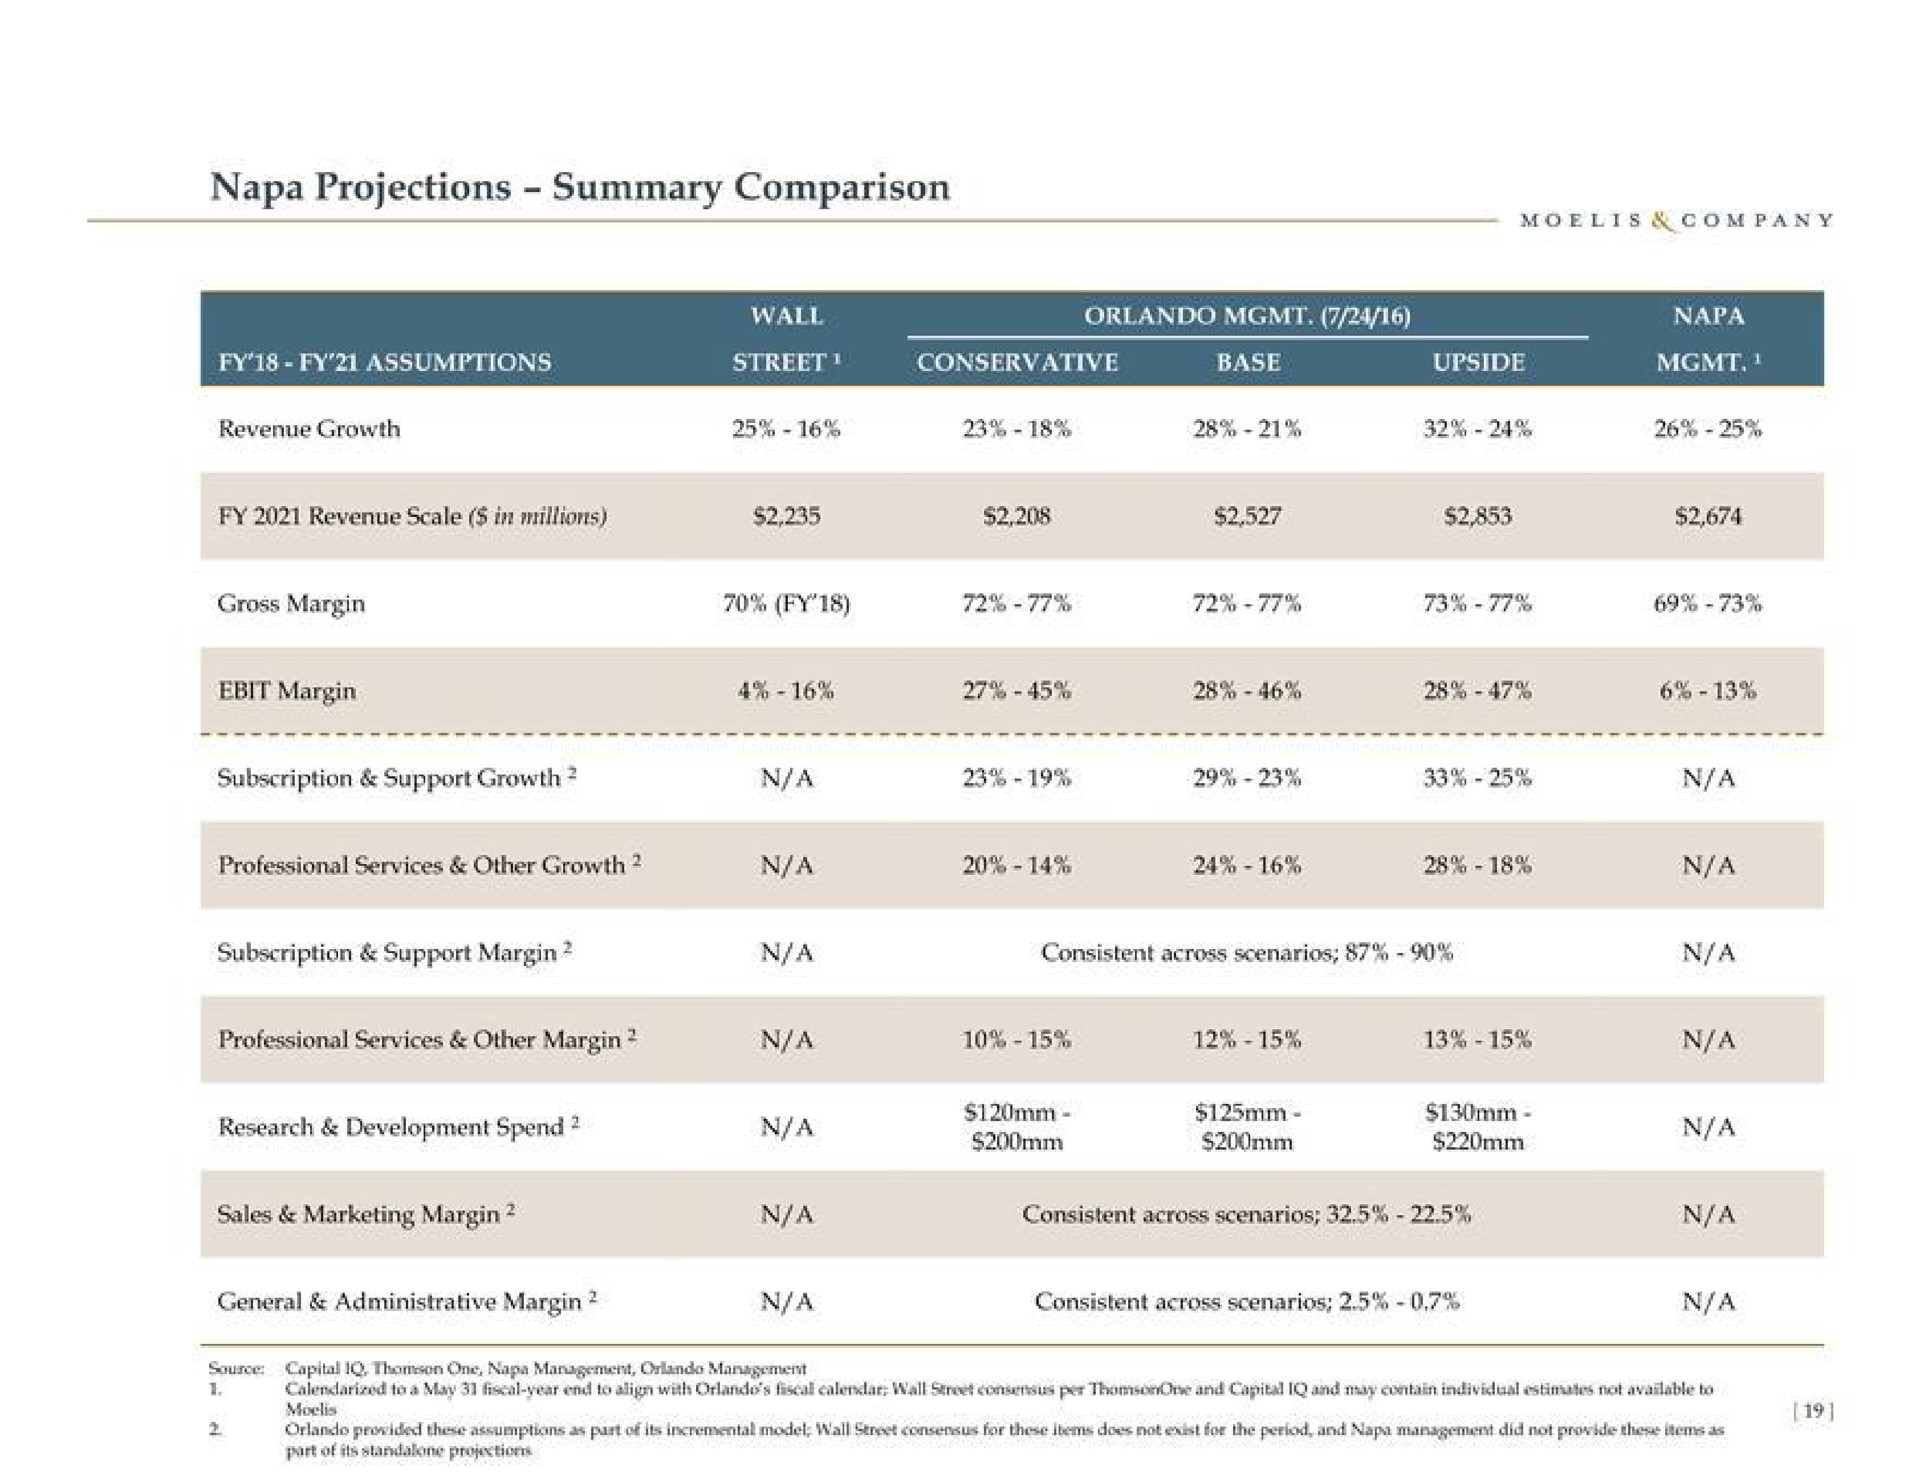 napa projections summary comparison we a development spend a a | Moelis & Company